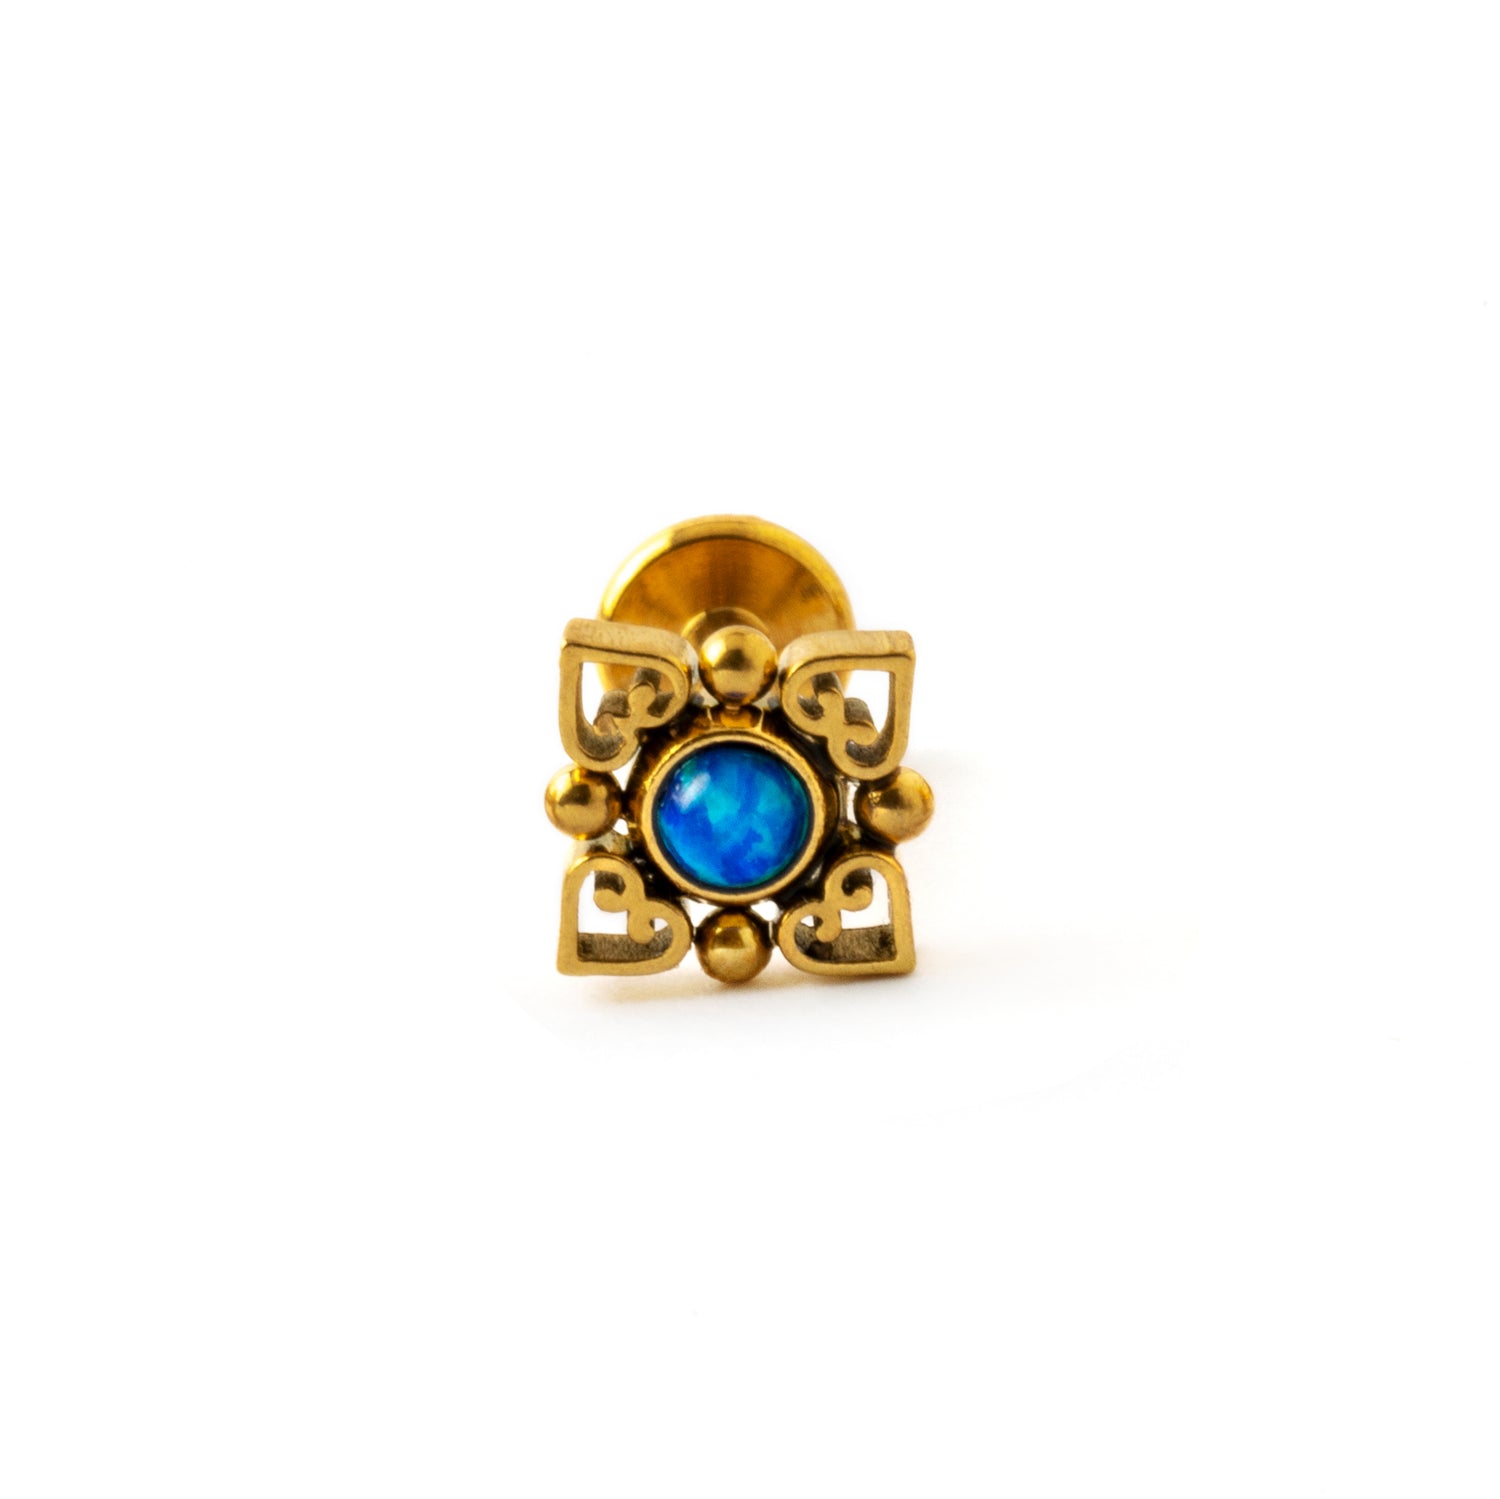 Neptune golden labret with blue opal frontal view